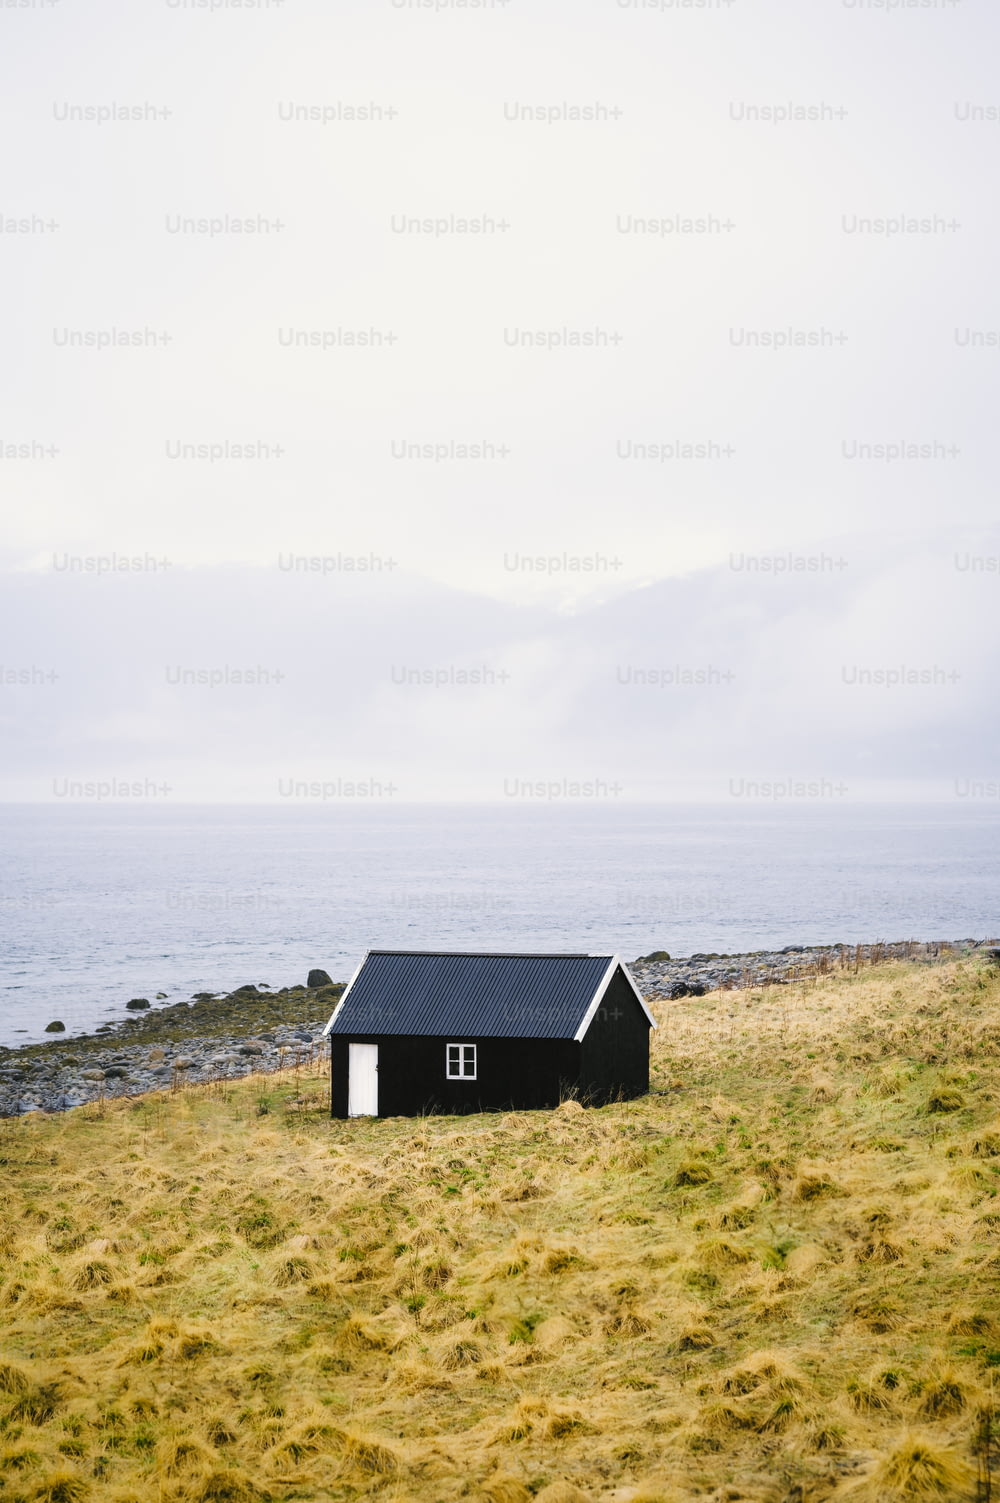 a small black house sitting on top of a grass covered field